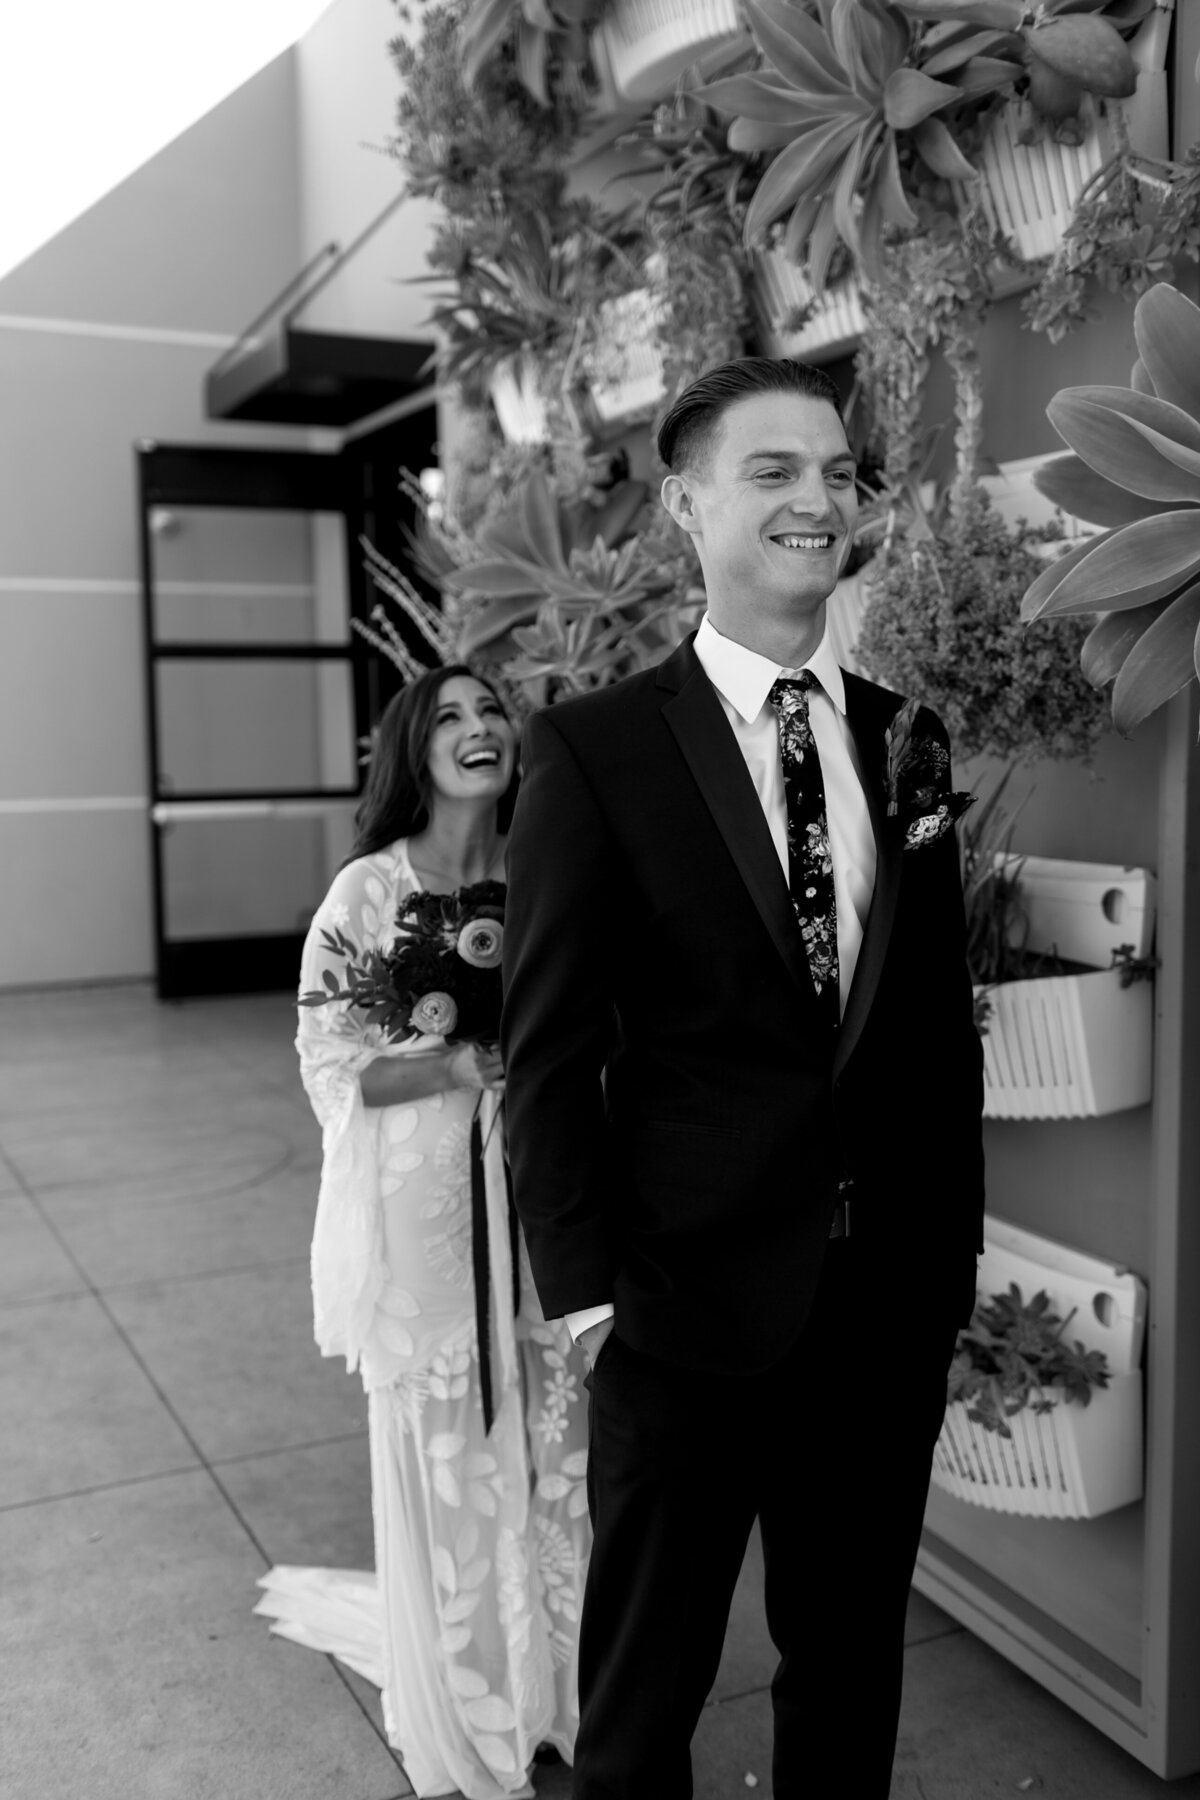 Bride walking up behind groom for their first look. Both excited smiles and waiting with anticipation.